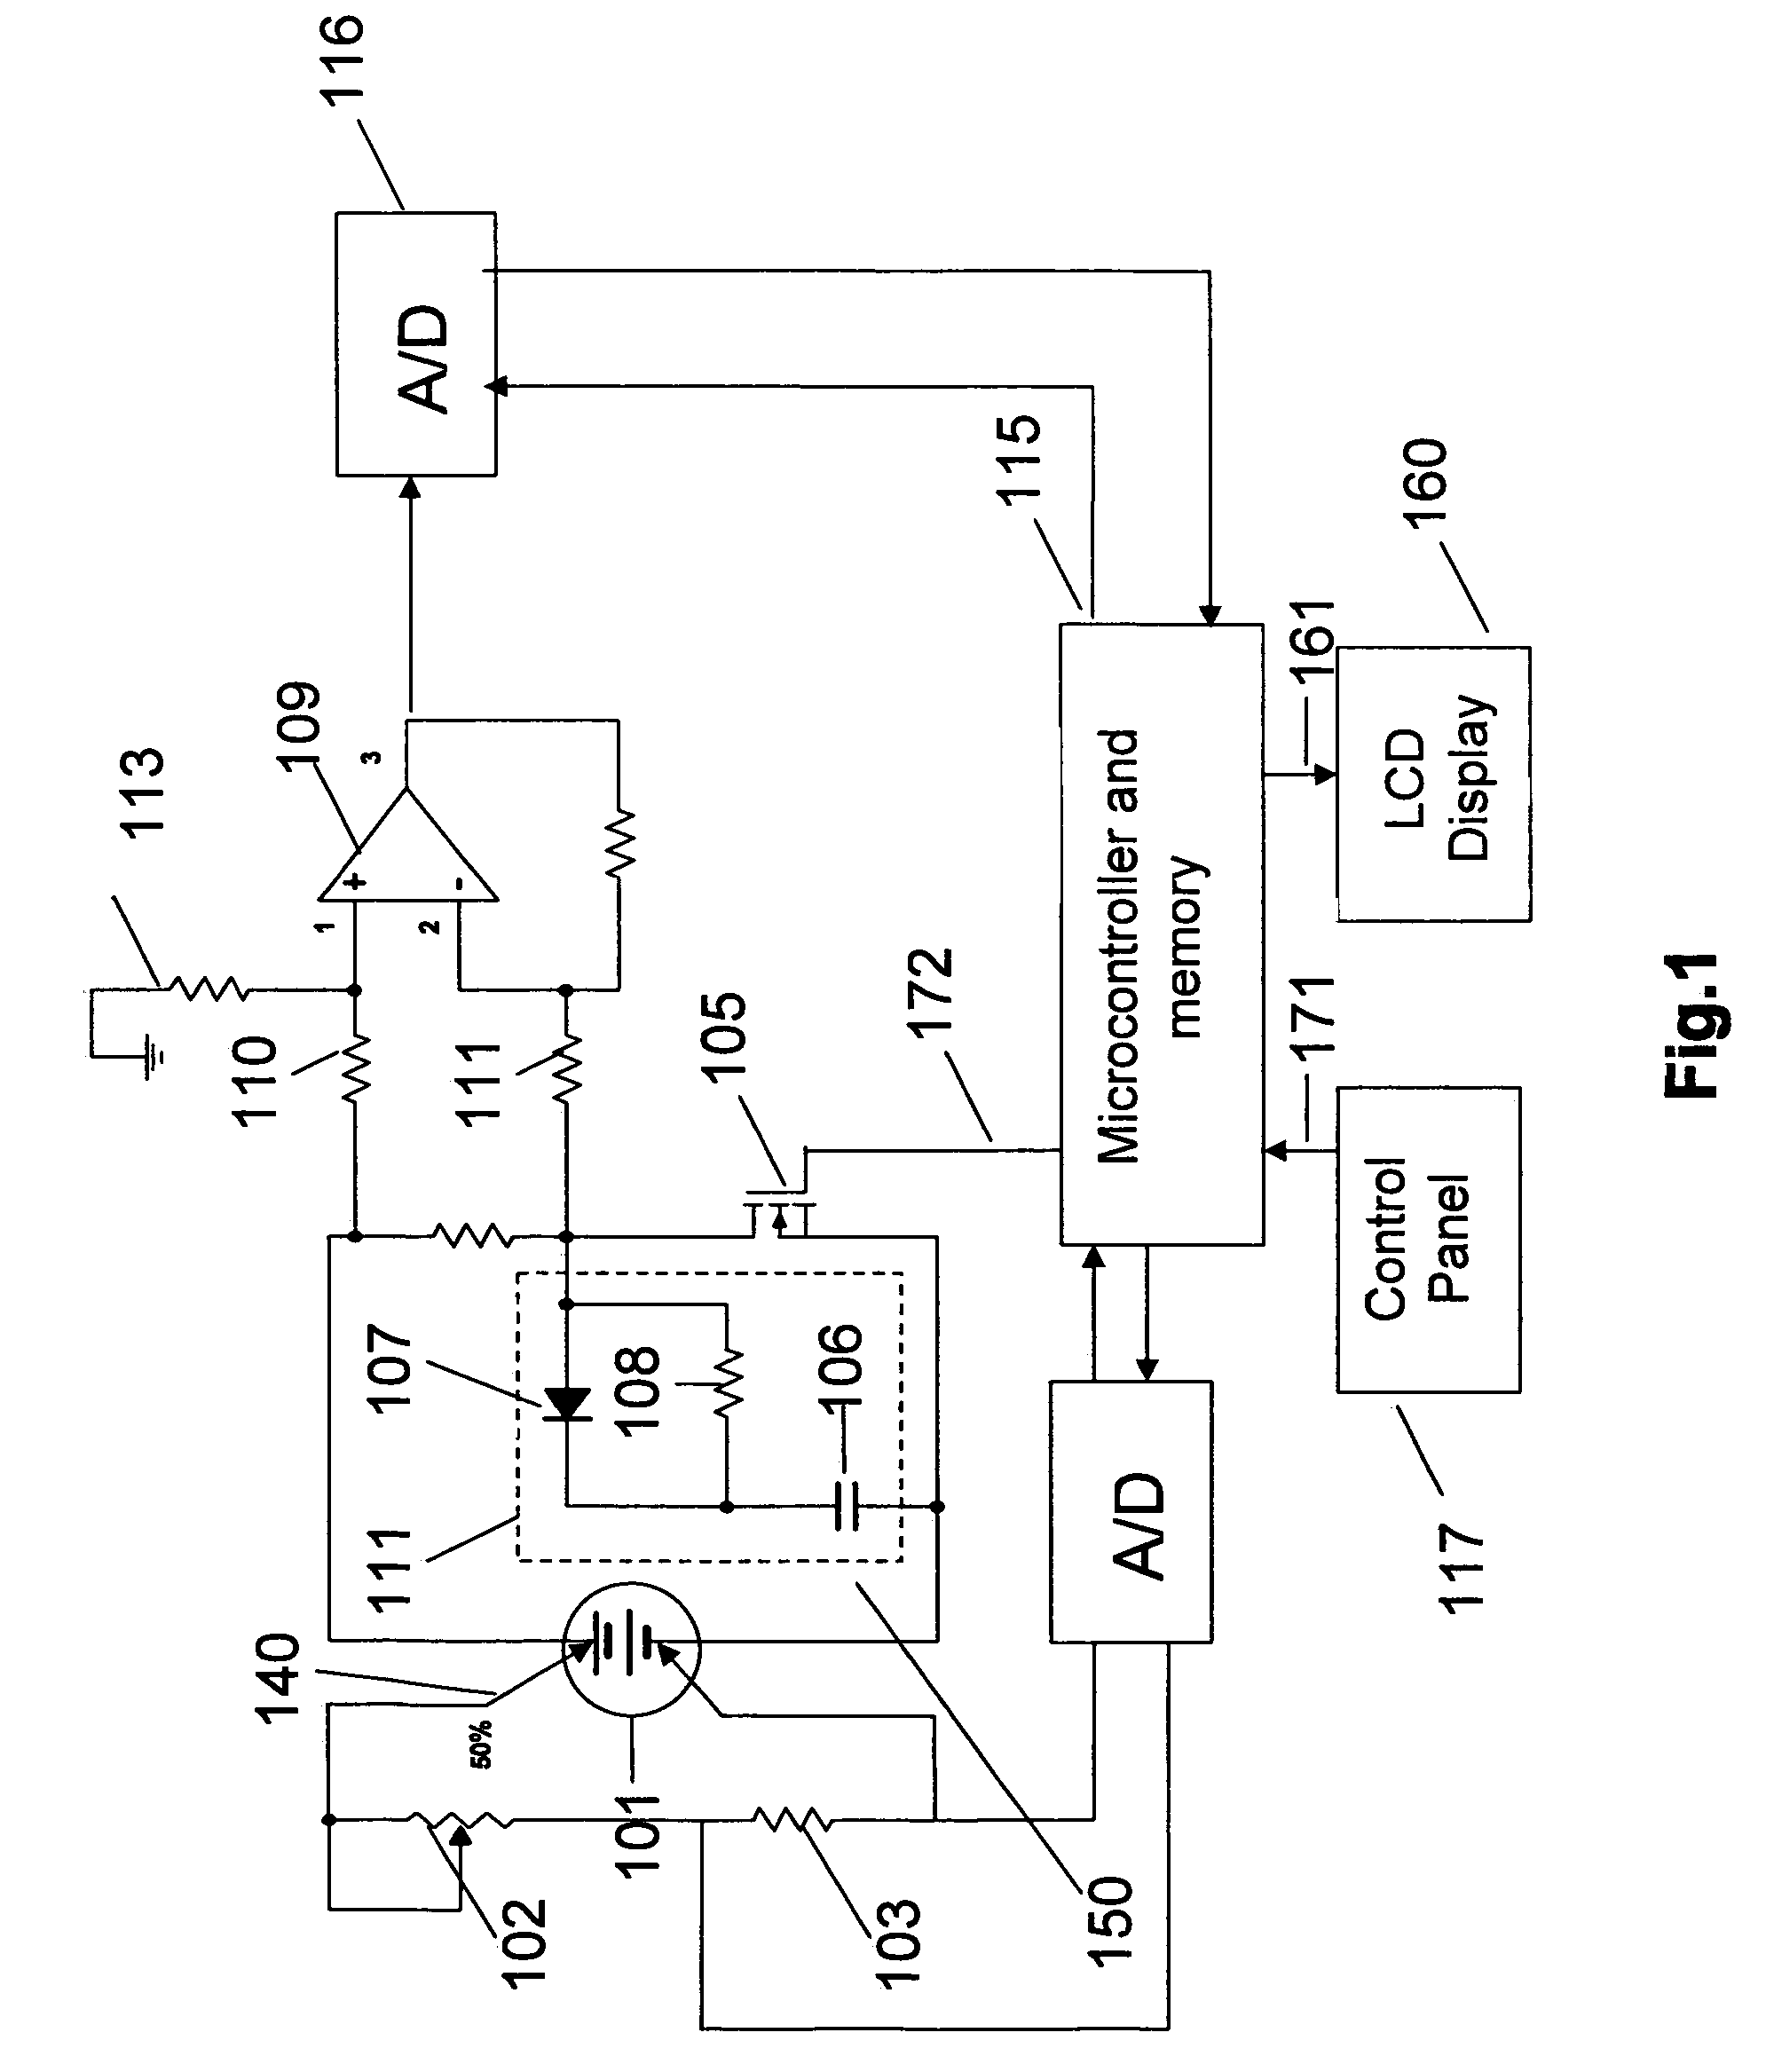 Method for testing battery condition